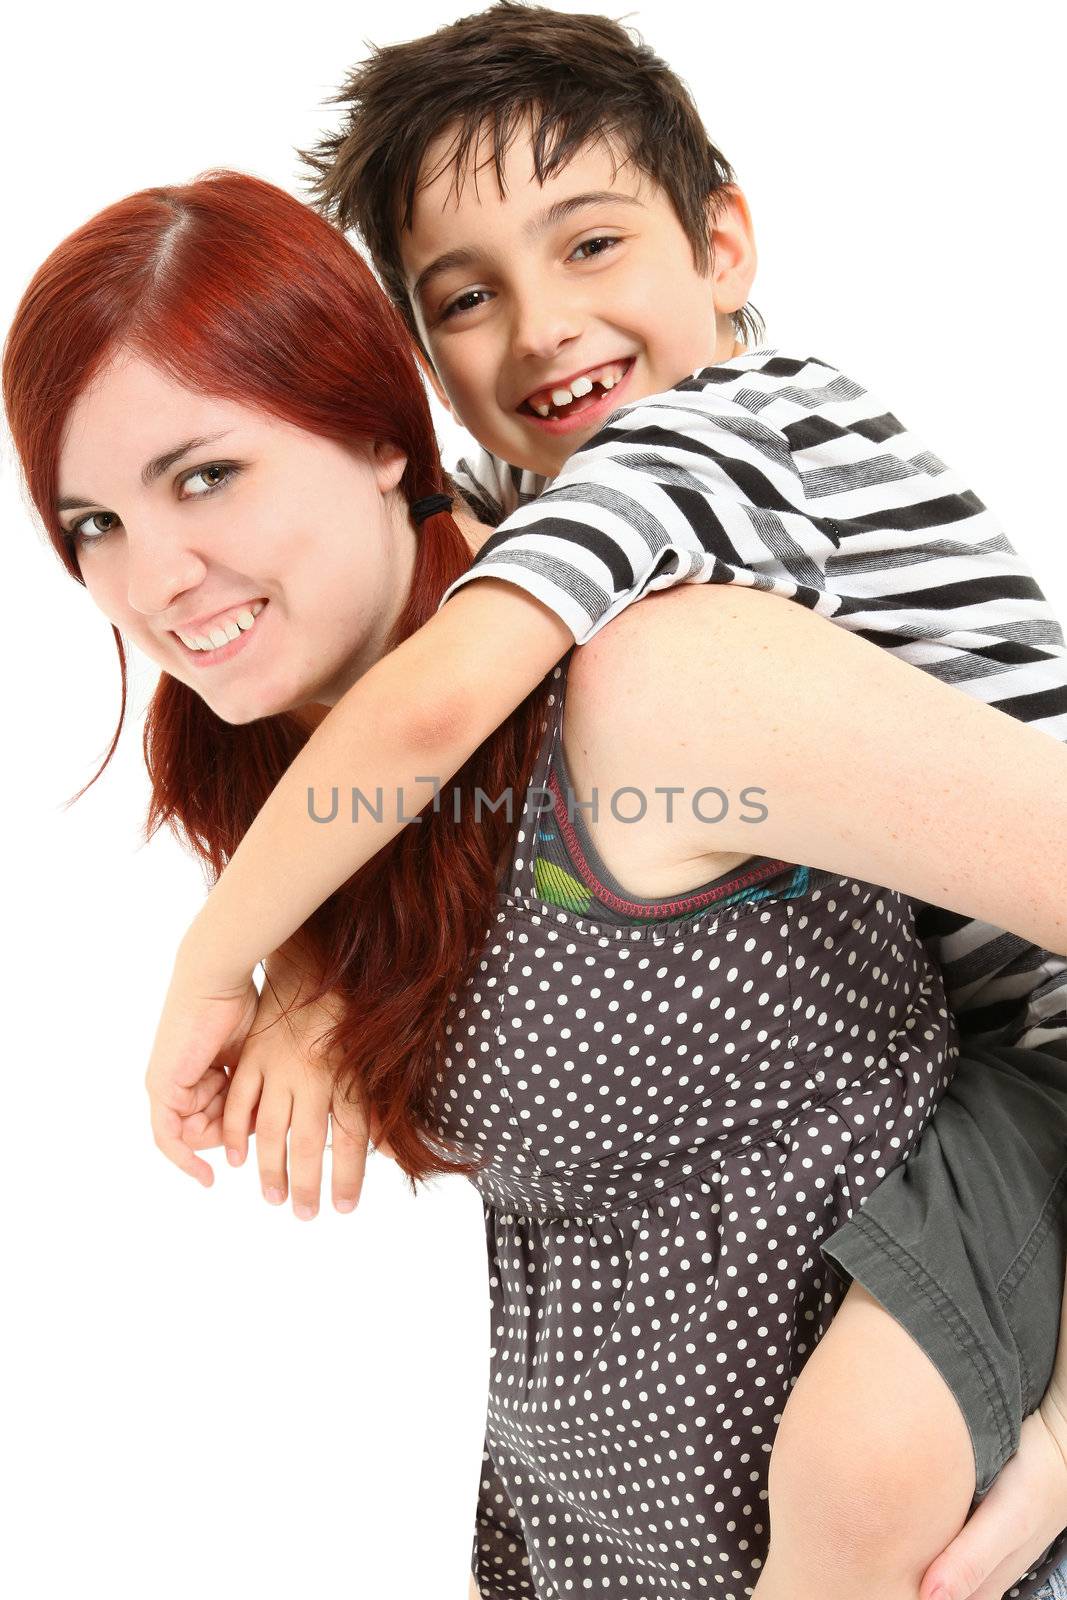 Adorable 8 year old boy getting piggy back ride from babysitter over white background.